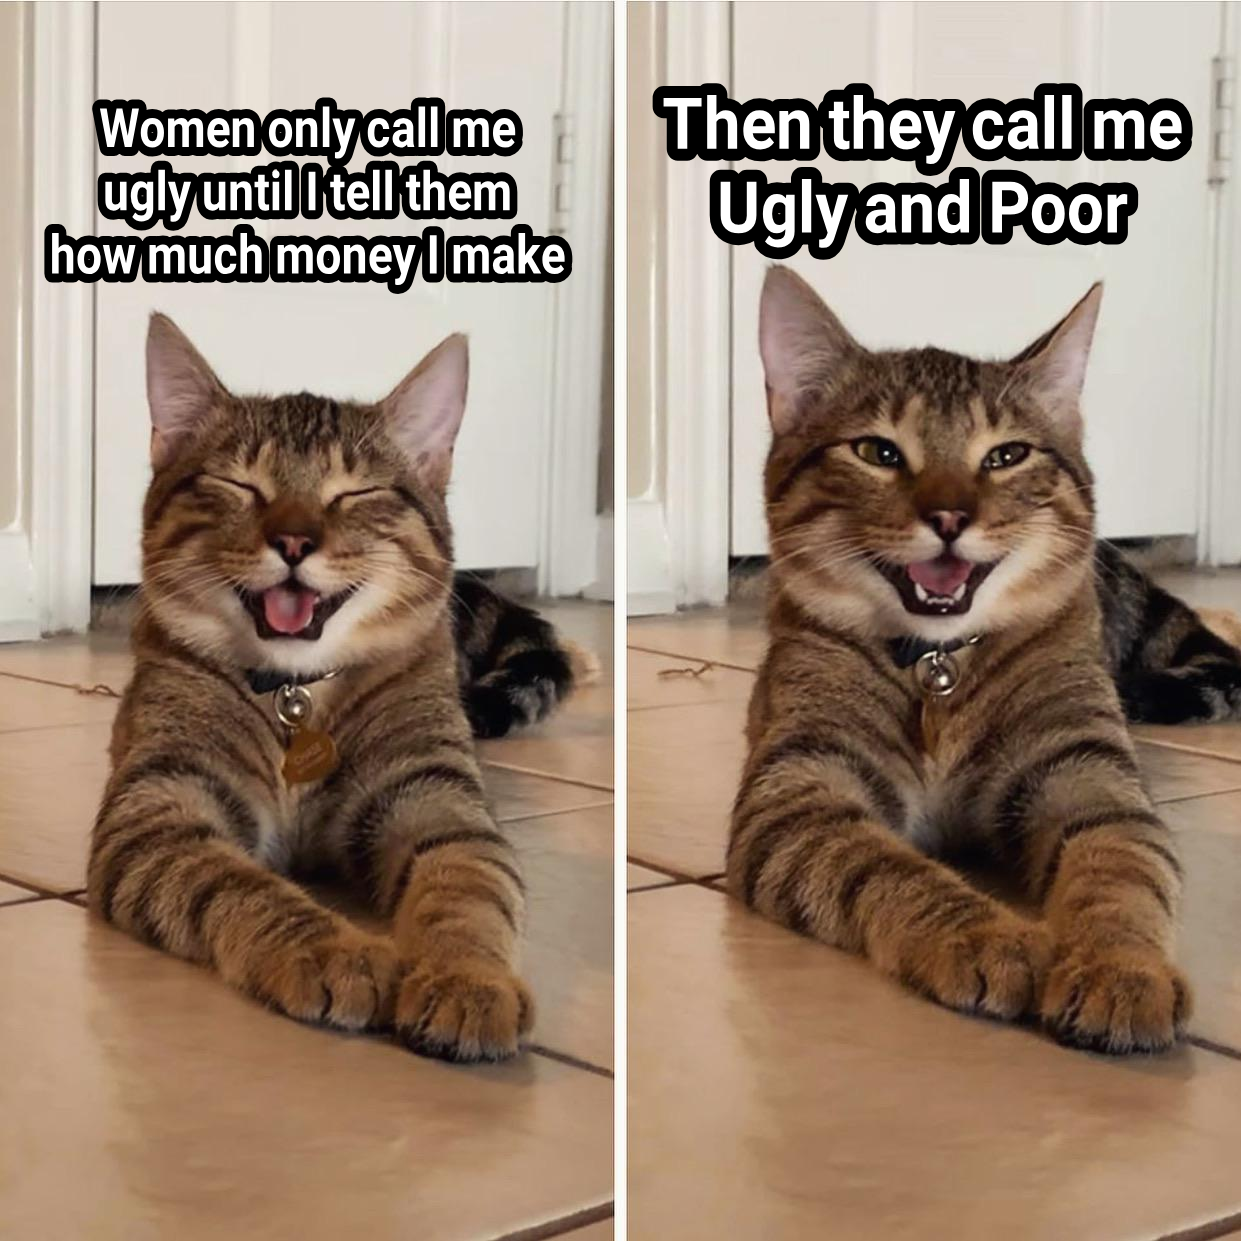 Who's laughing meow?